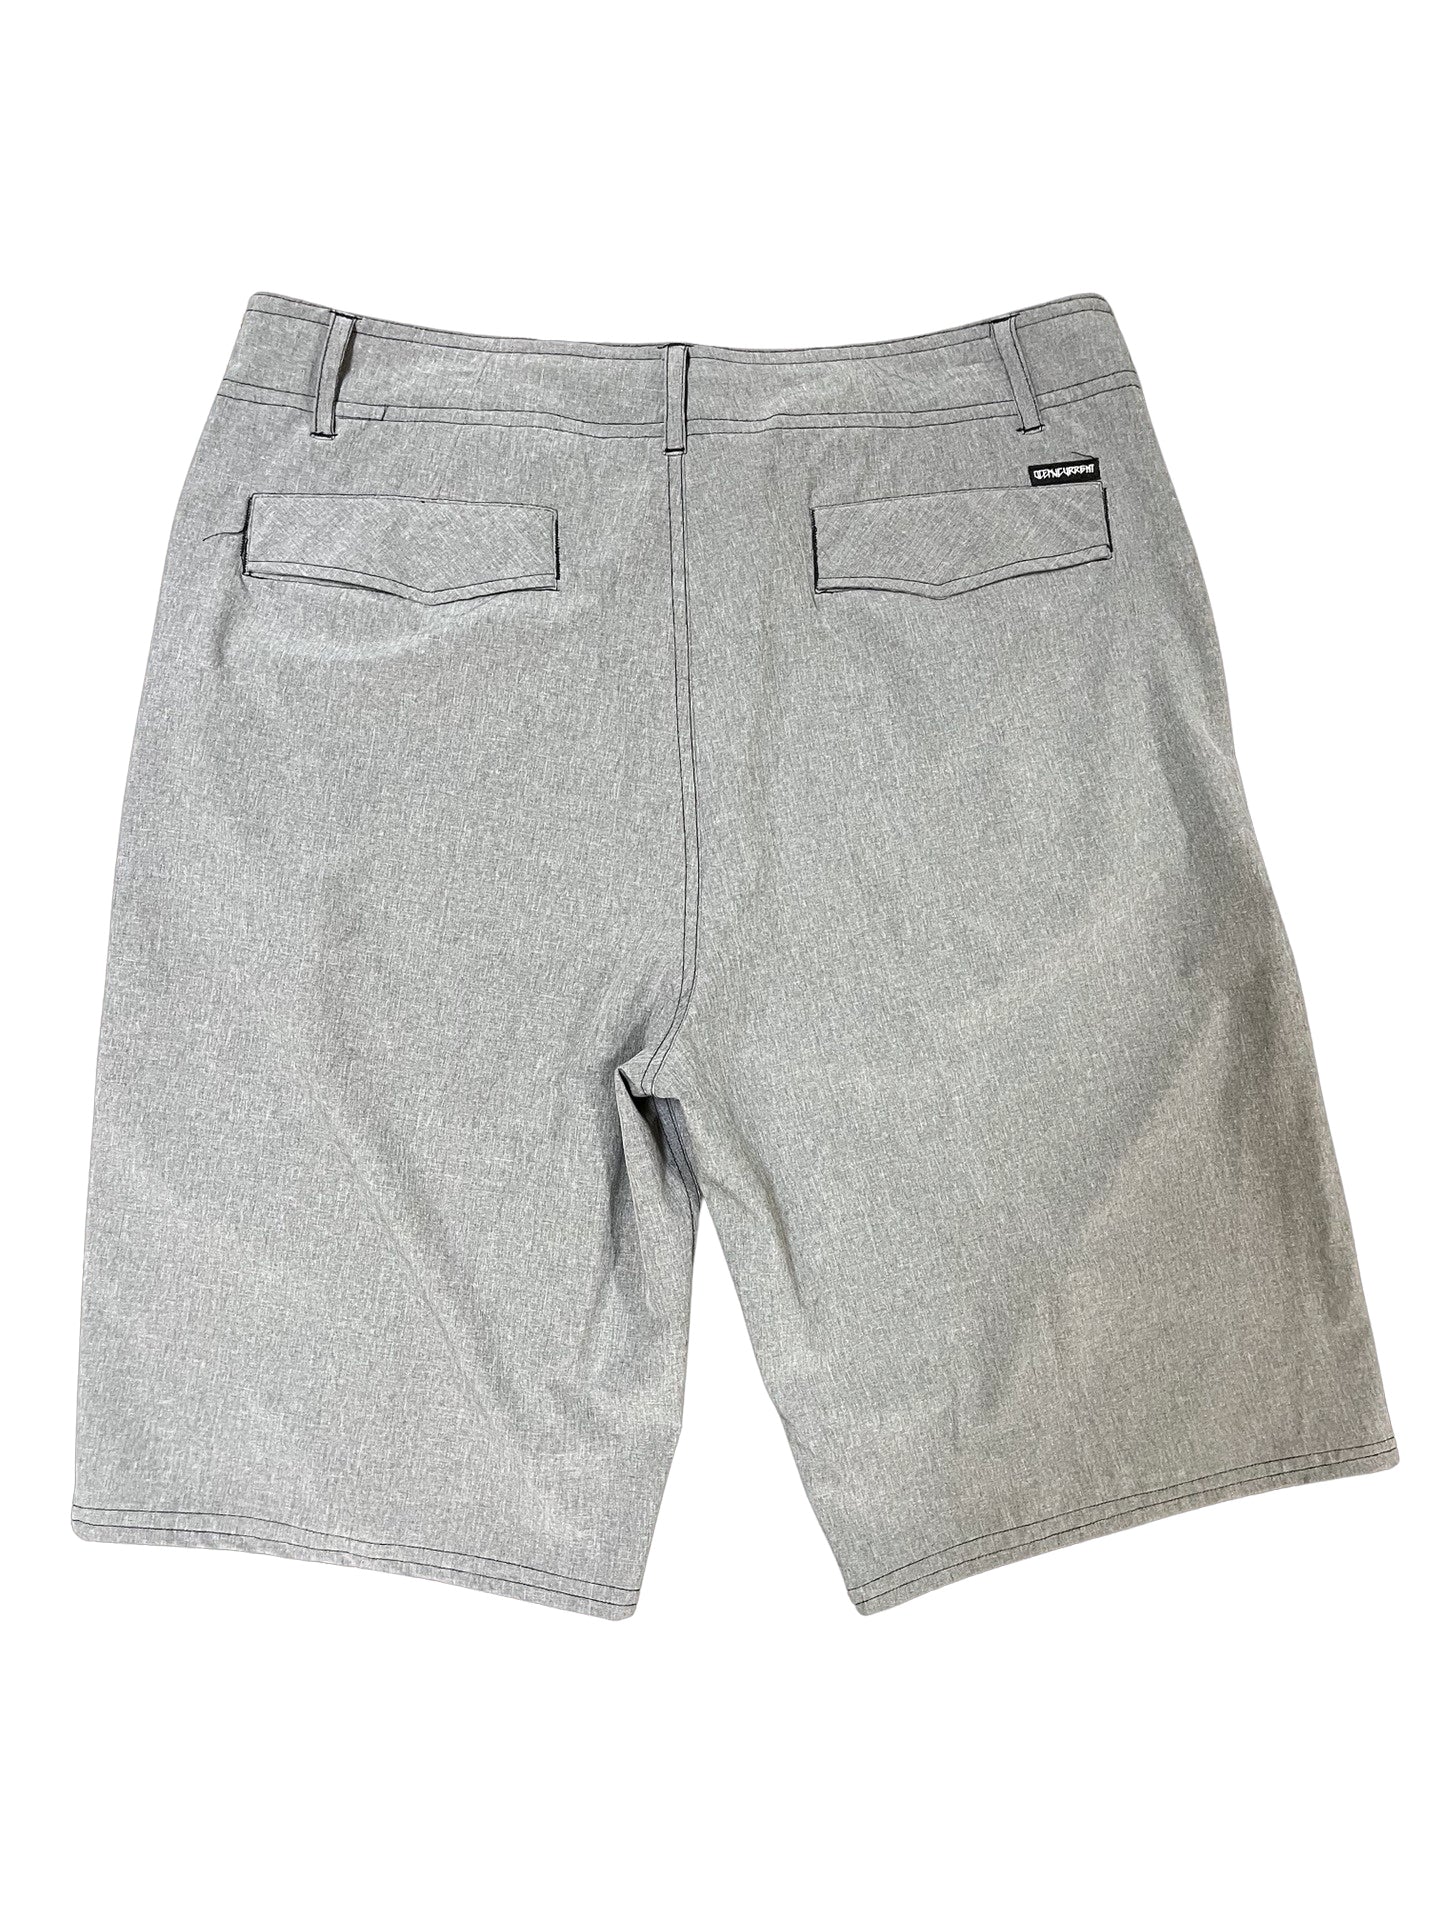 Size 34 Ocean Current Shorts